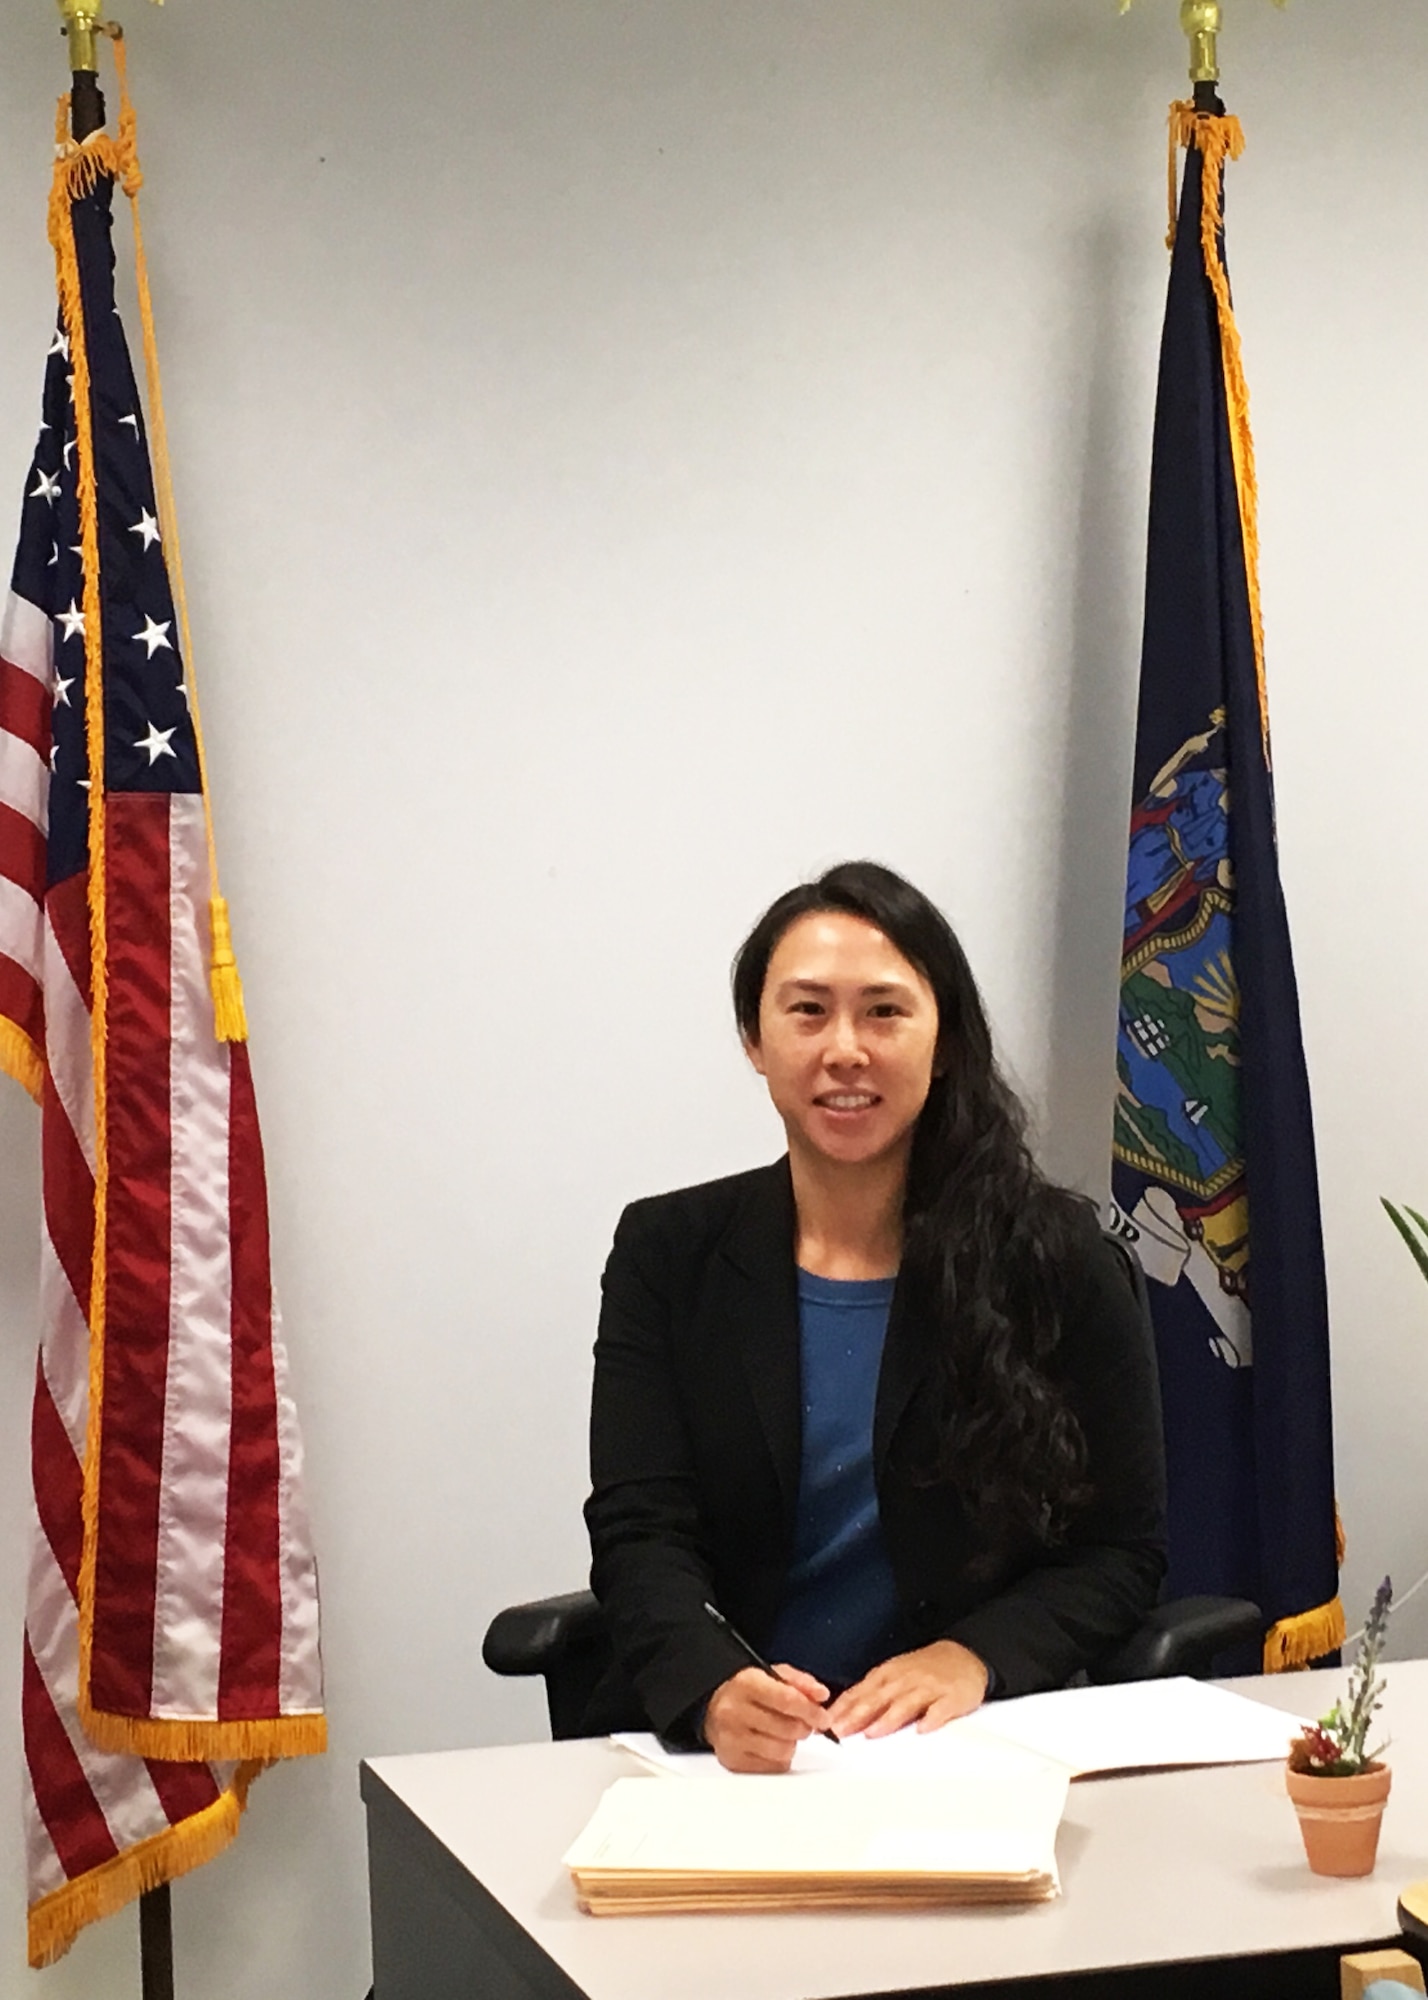 Senior Airman Ivory Lai, 459th Security Forces Squadron, poses for a photo at her civilian job where she serves as an administrative law judge for the state of New York. Though she has a successful law career, Lai made the decision to enlist in the Air Force Reserve to become a security a security forces member and "get the military experience". (U.S. Air Force photo/Staff Sgt. Cierra Presentado)